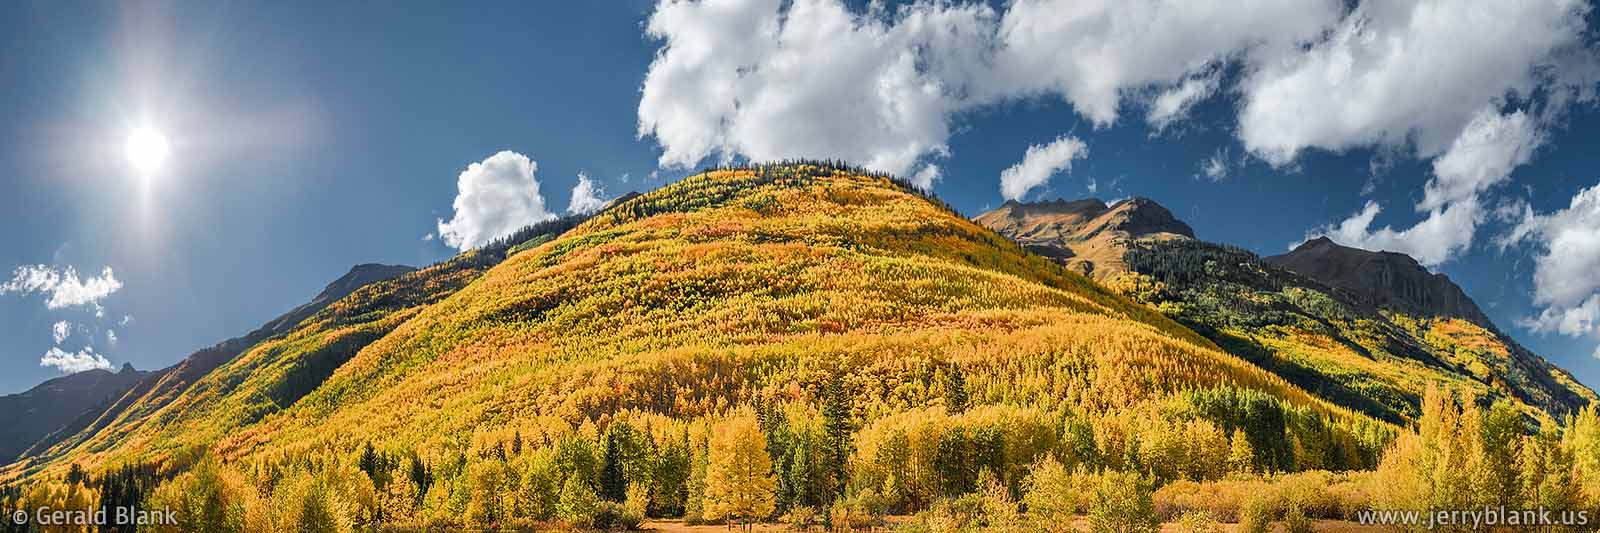 Autumn color on the foothills of Hayden Mountain, as seen from US Hwy. 550, in Colorado’s San Juan Mountains